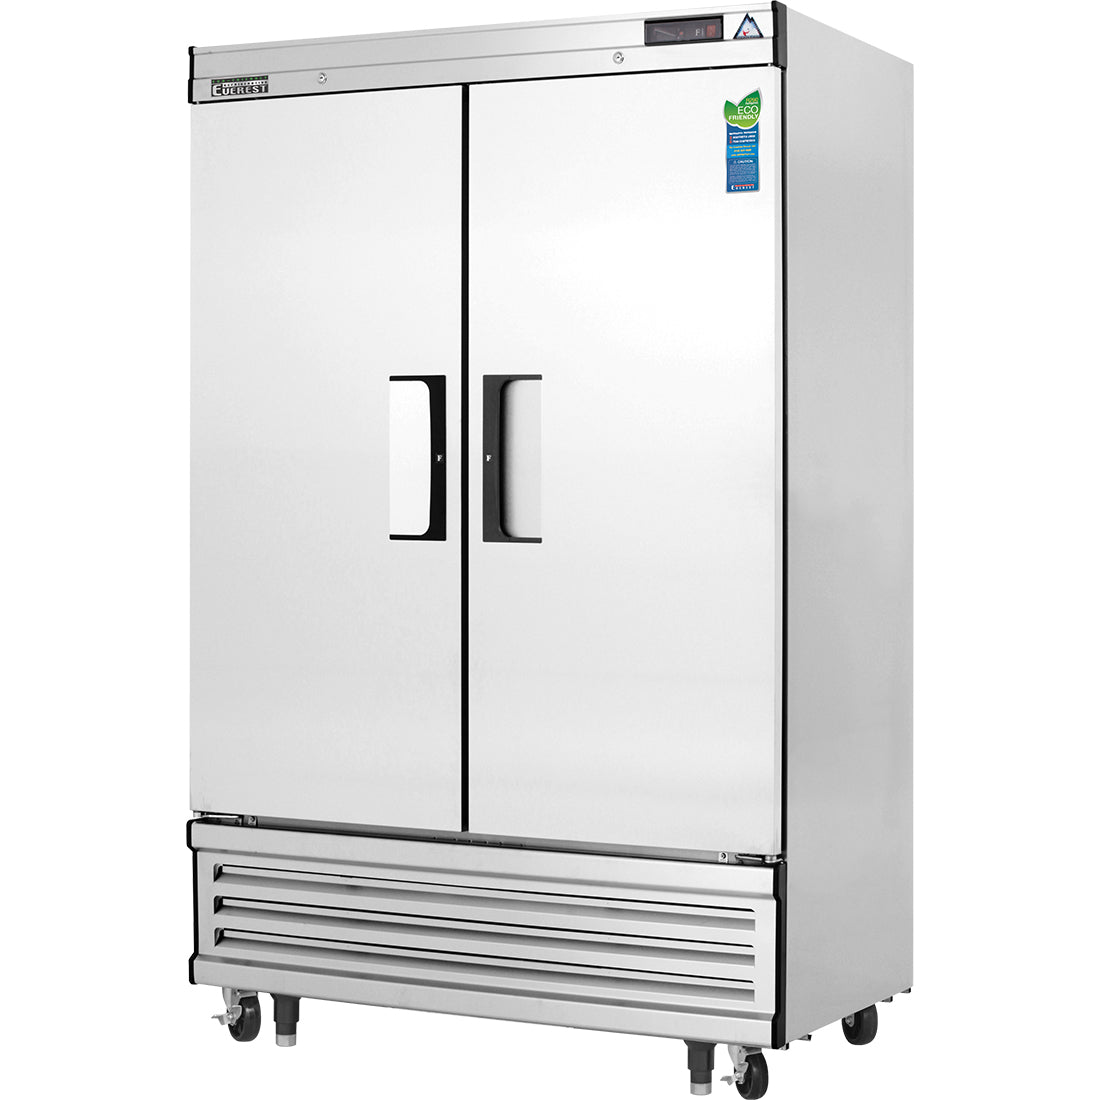 Everest EB Series-EBSF2 Two Section Solid Door Upright Reach-In Freezer - 48 Cu. Ft.